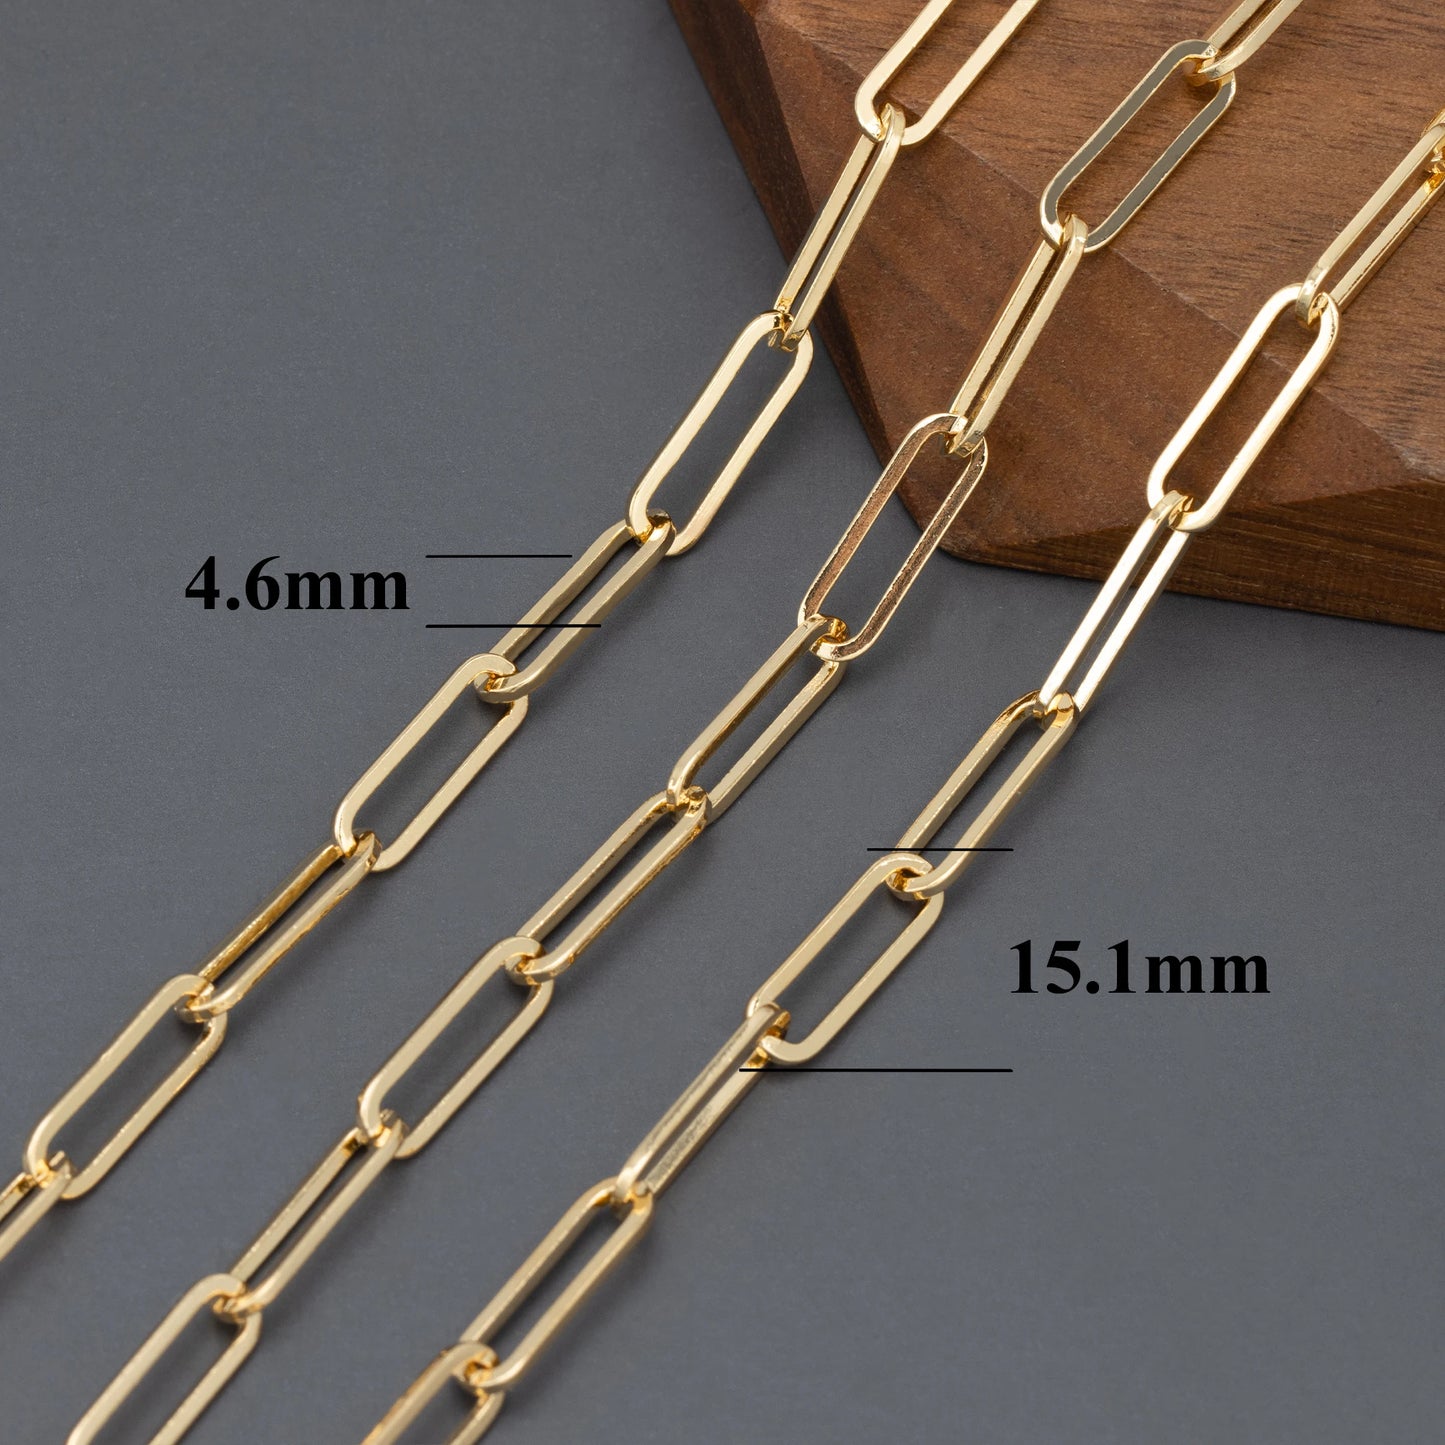 GUFEATHER C126,jewelry accessories,diy chain,pass REACH,nickel free,18k gold plated,jewelry making,diy bracelet necklace,1m/lot